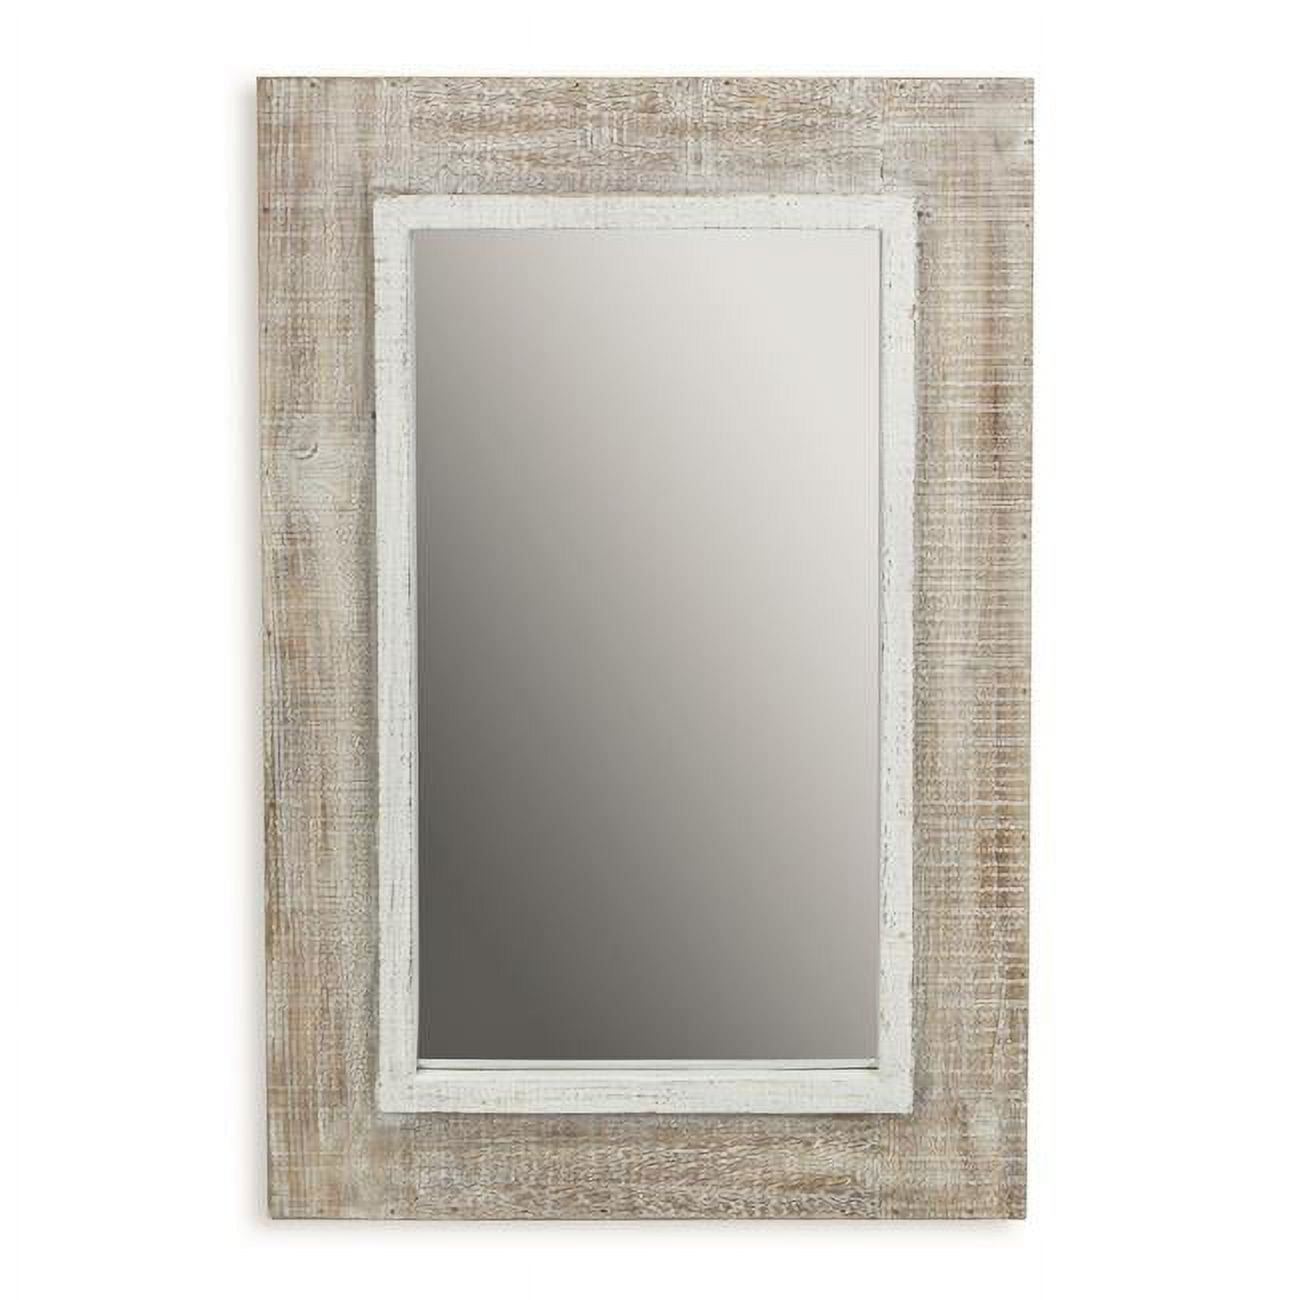 Picture of Cheungs 5189 Wood Frame Mirror